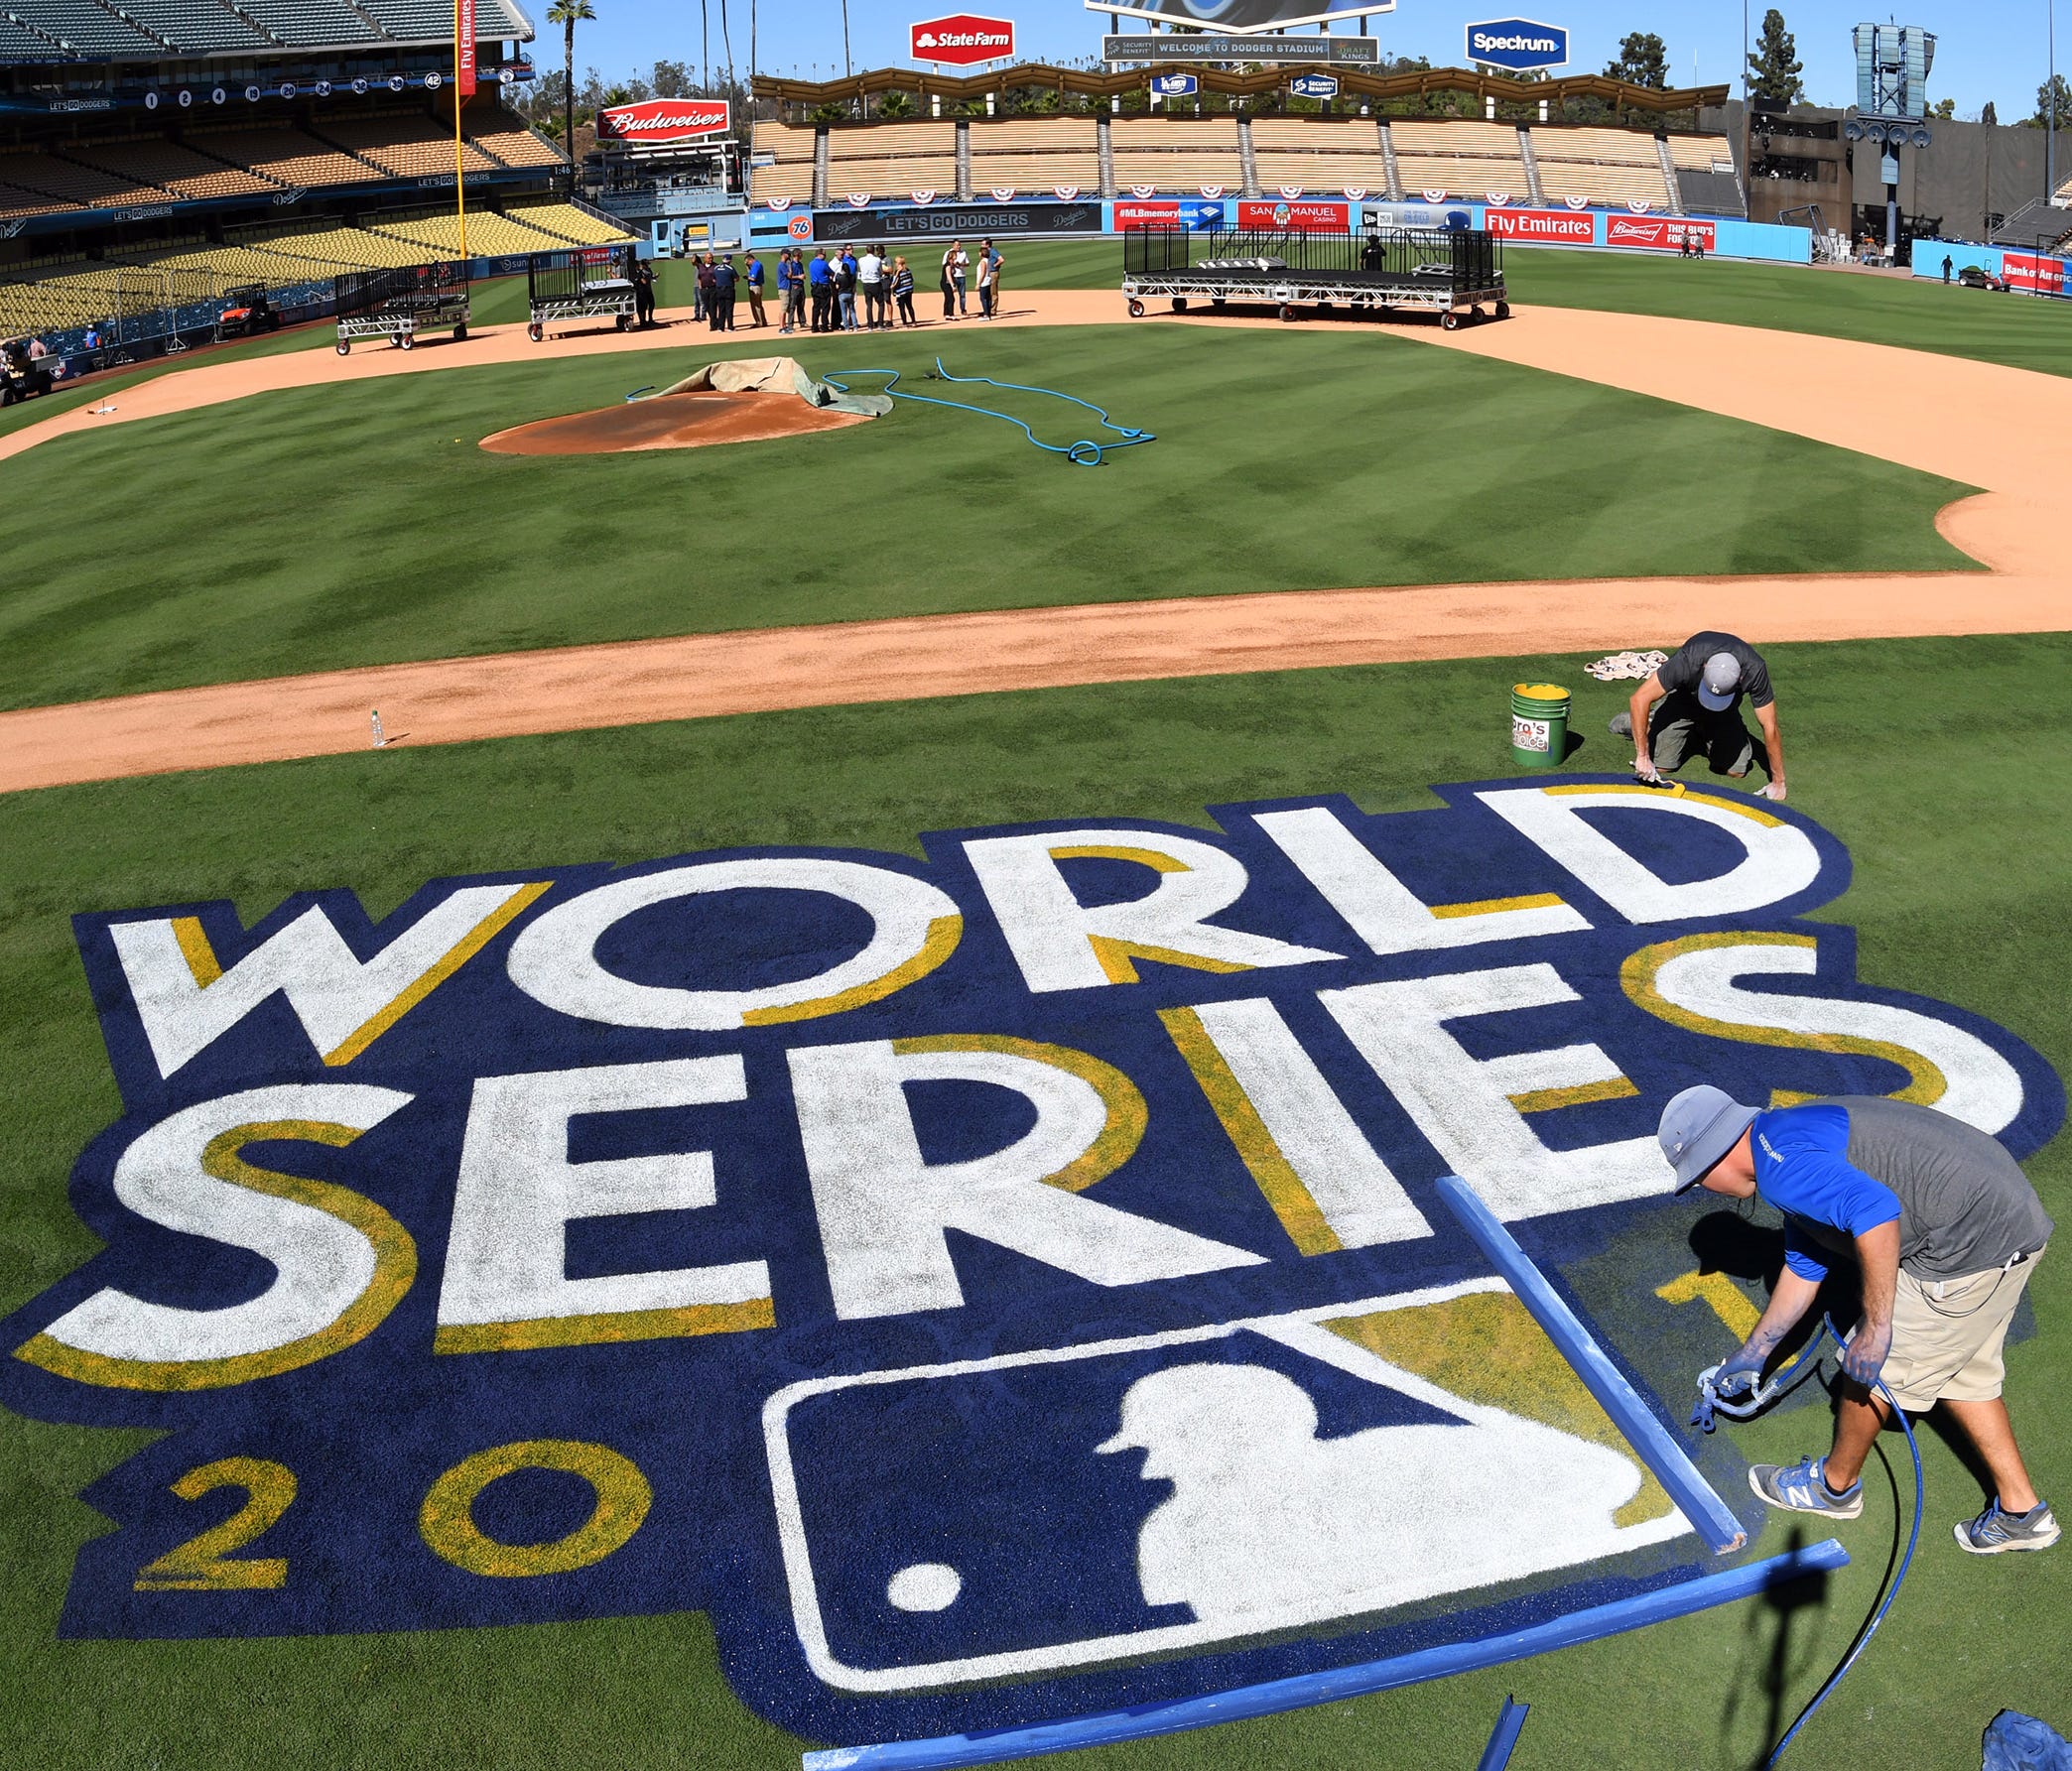 Oct. 23: Media Day/Workout at Dodger Stadium - Painters put the finishing touches on the World Series logo and the field before Monday's workouts at Dodger Stadium.